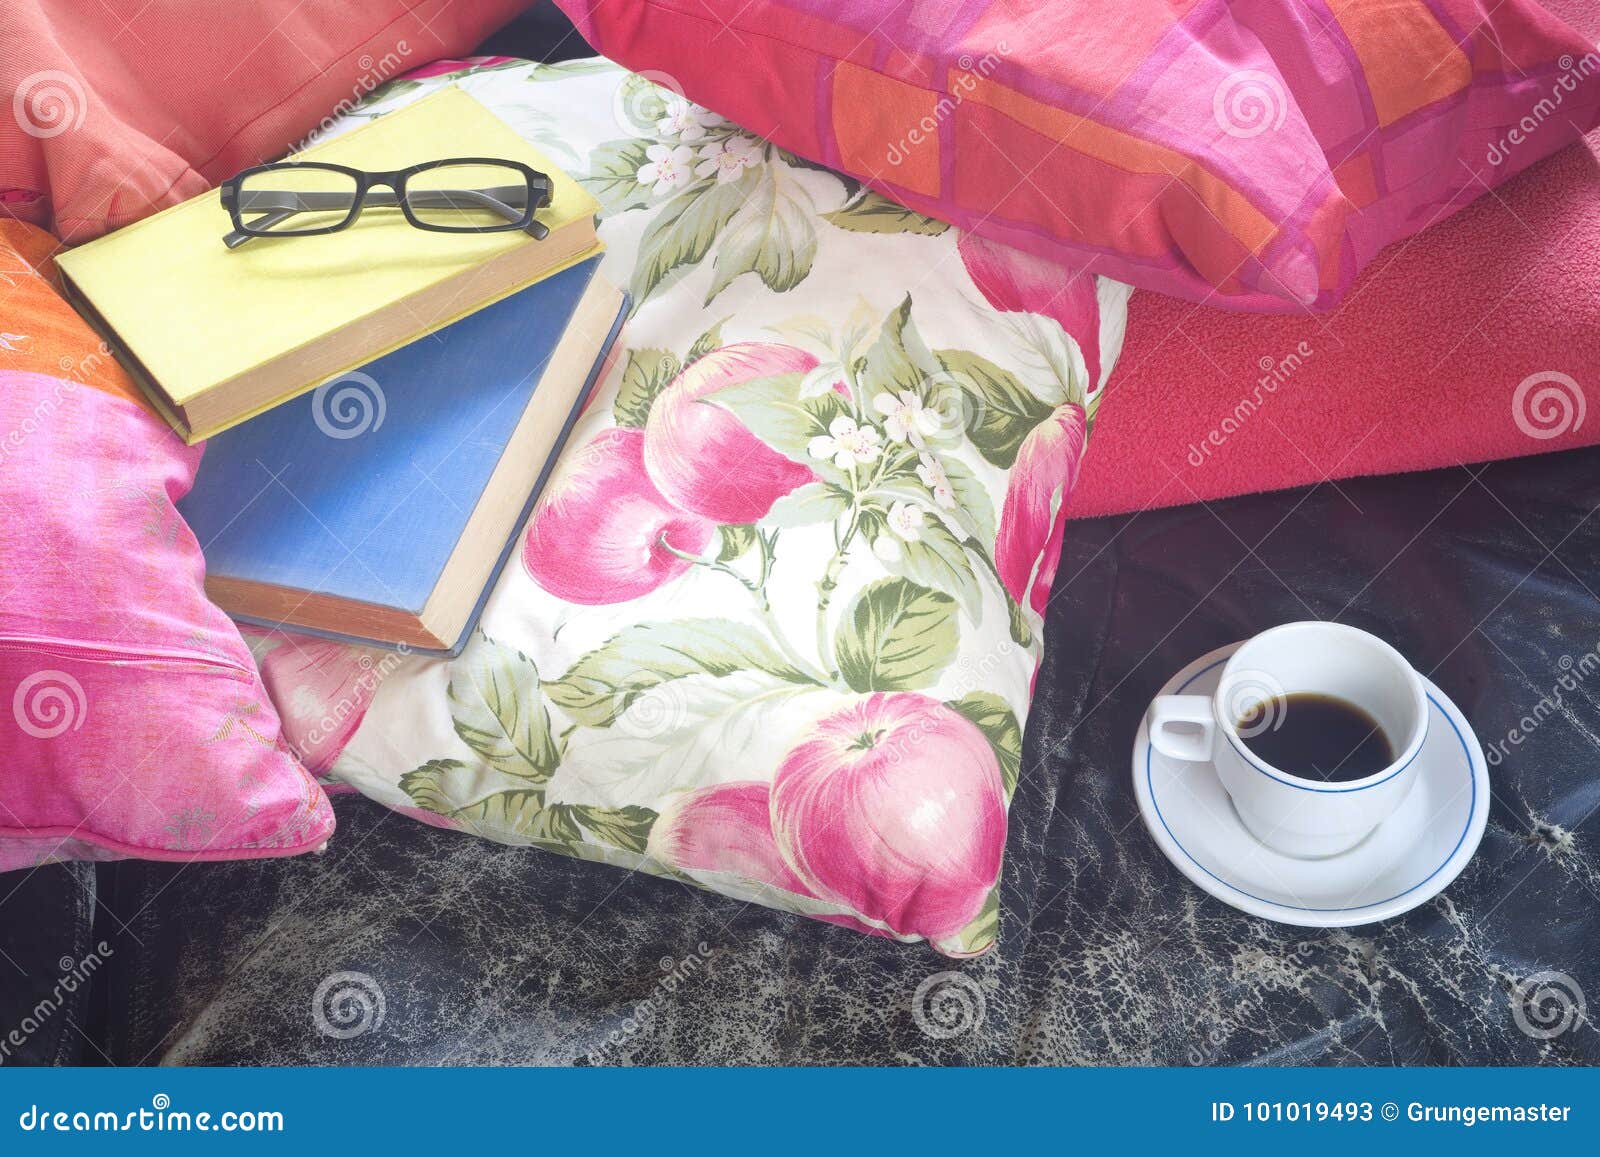 books on a sofa with cup of coffee and specs